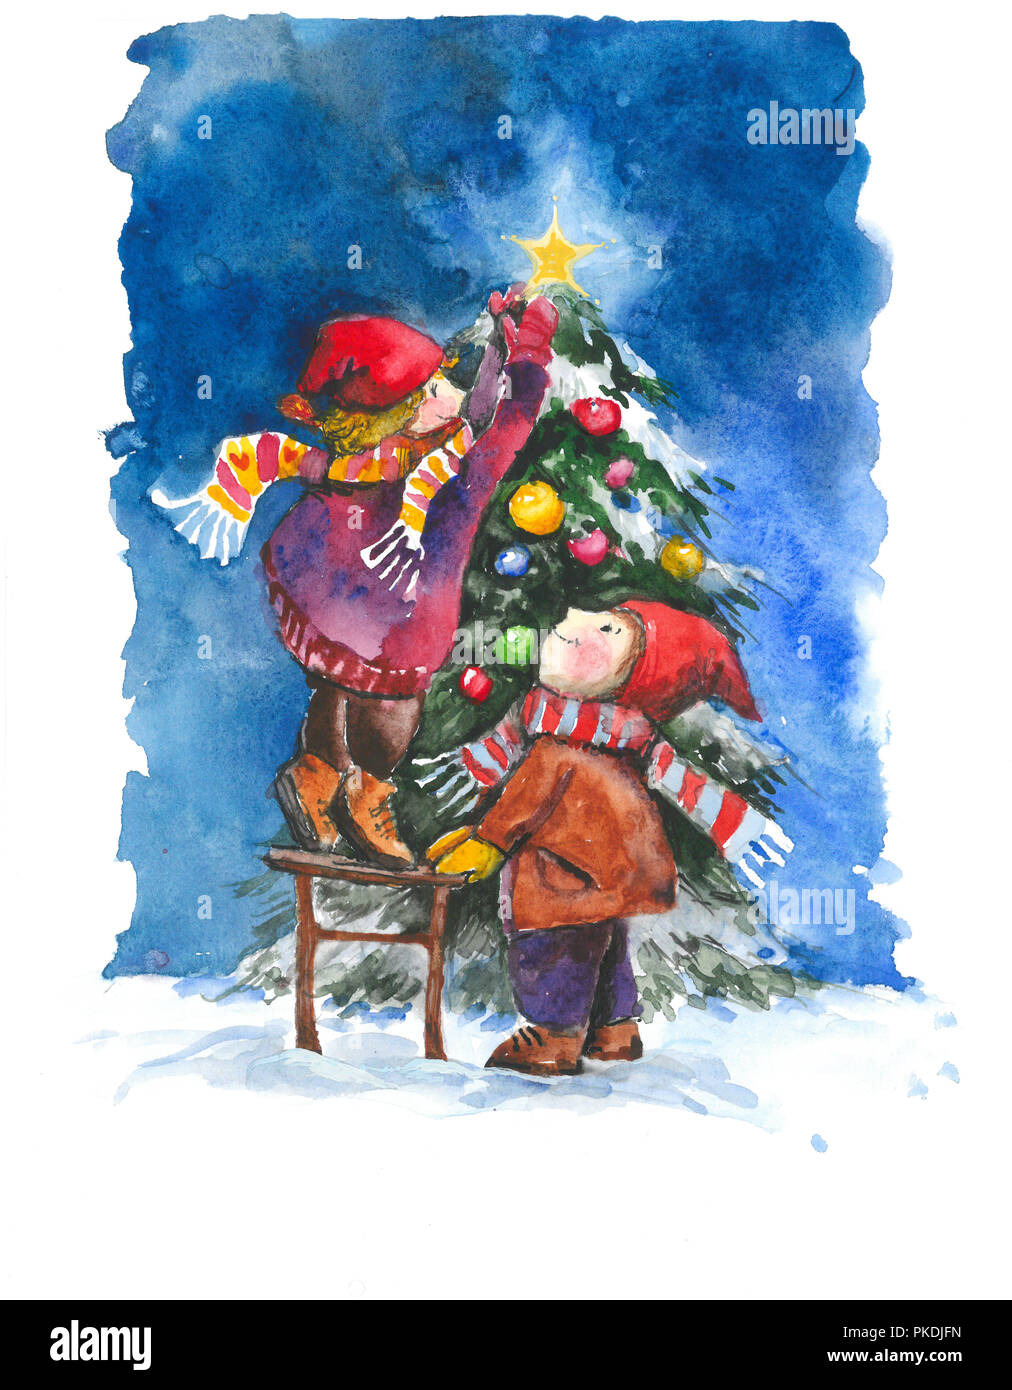 Christmas Watercolor Painting | vlr.eng.br